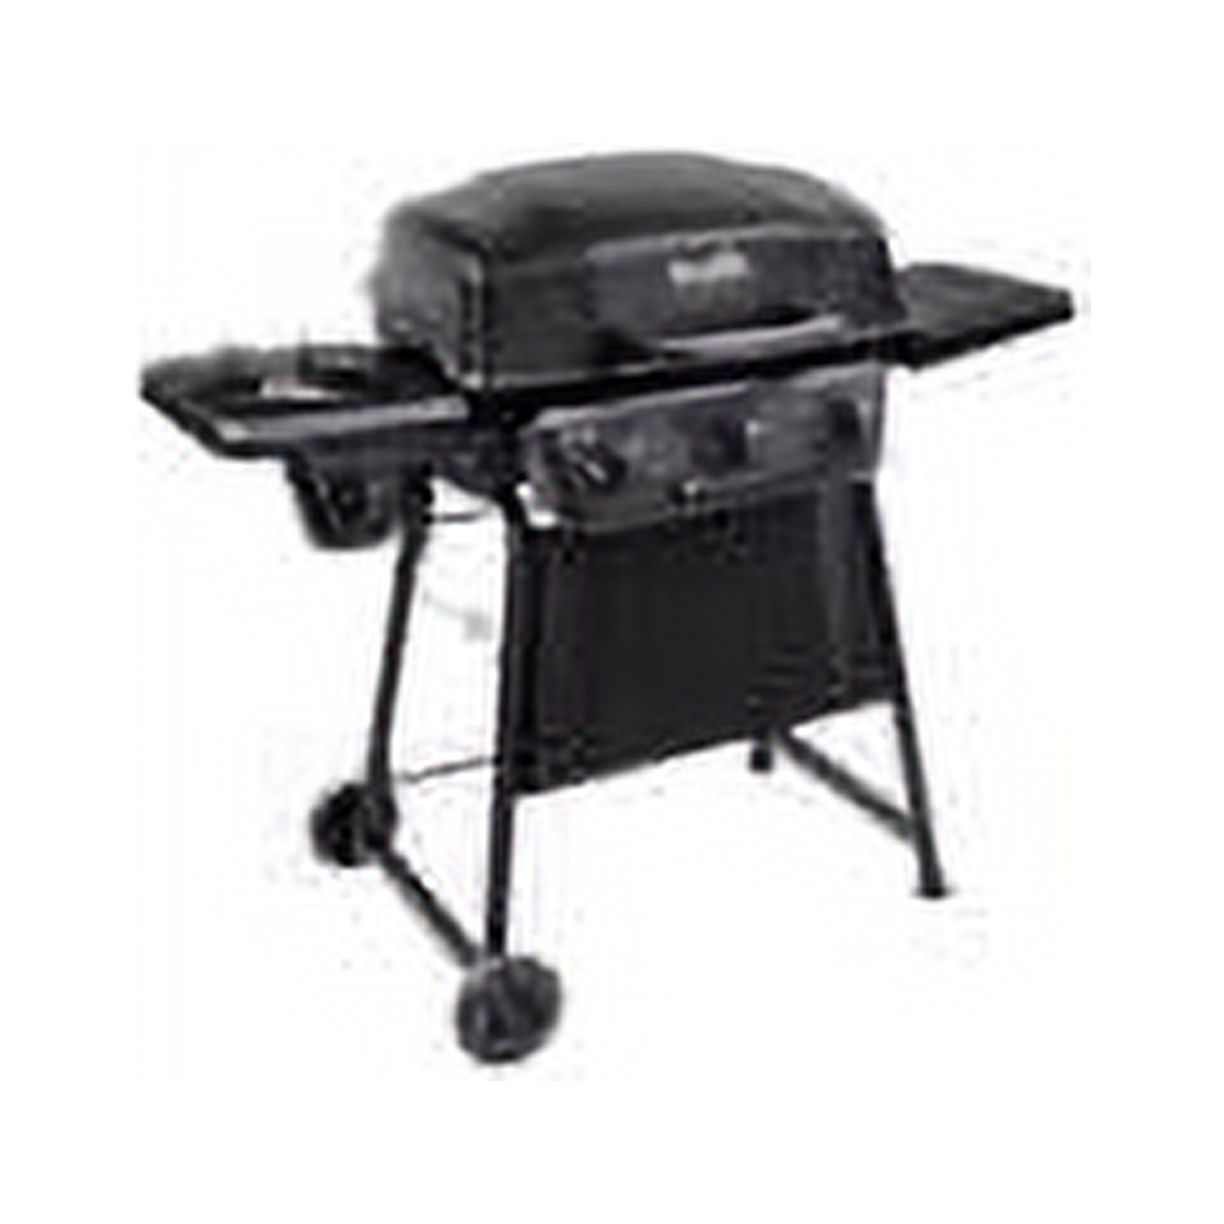 Char-Broil Classic 360 3-Burner Liquid Propane Gas Grill with Side Burner - image 1 of 5